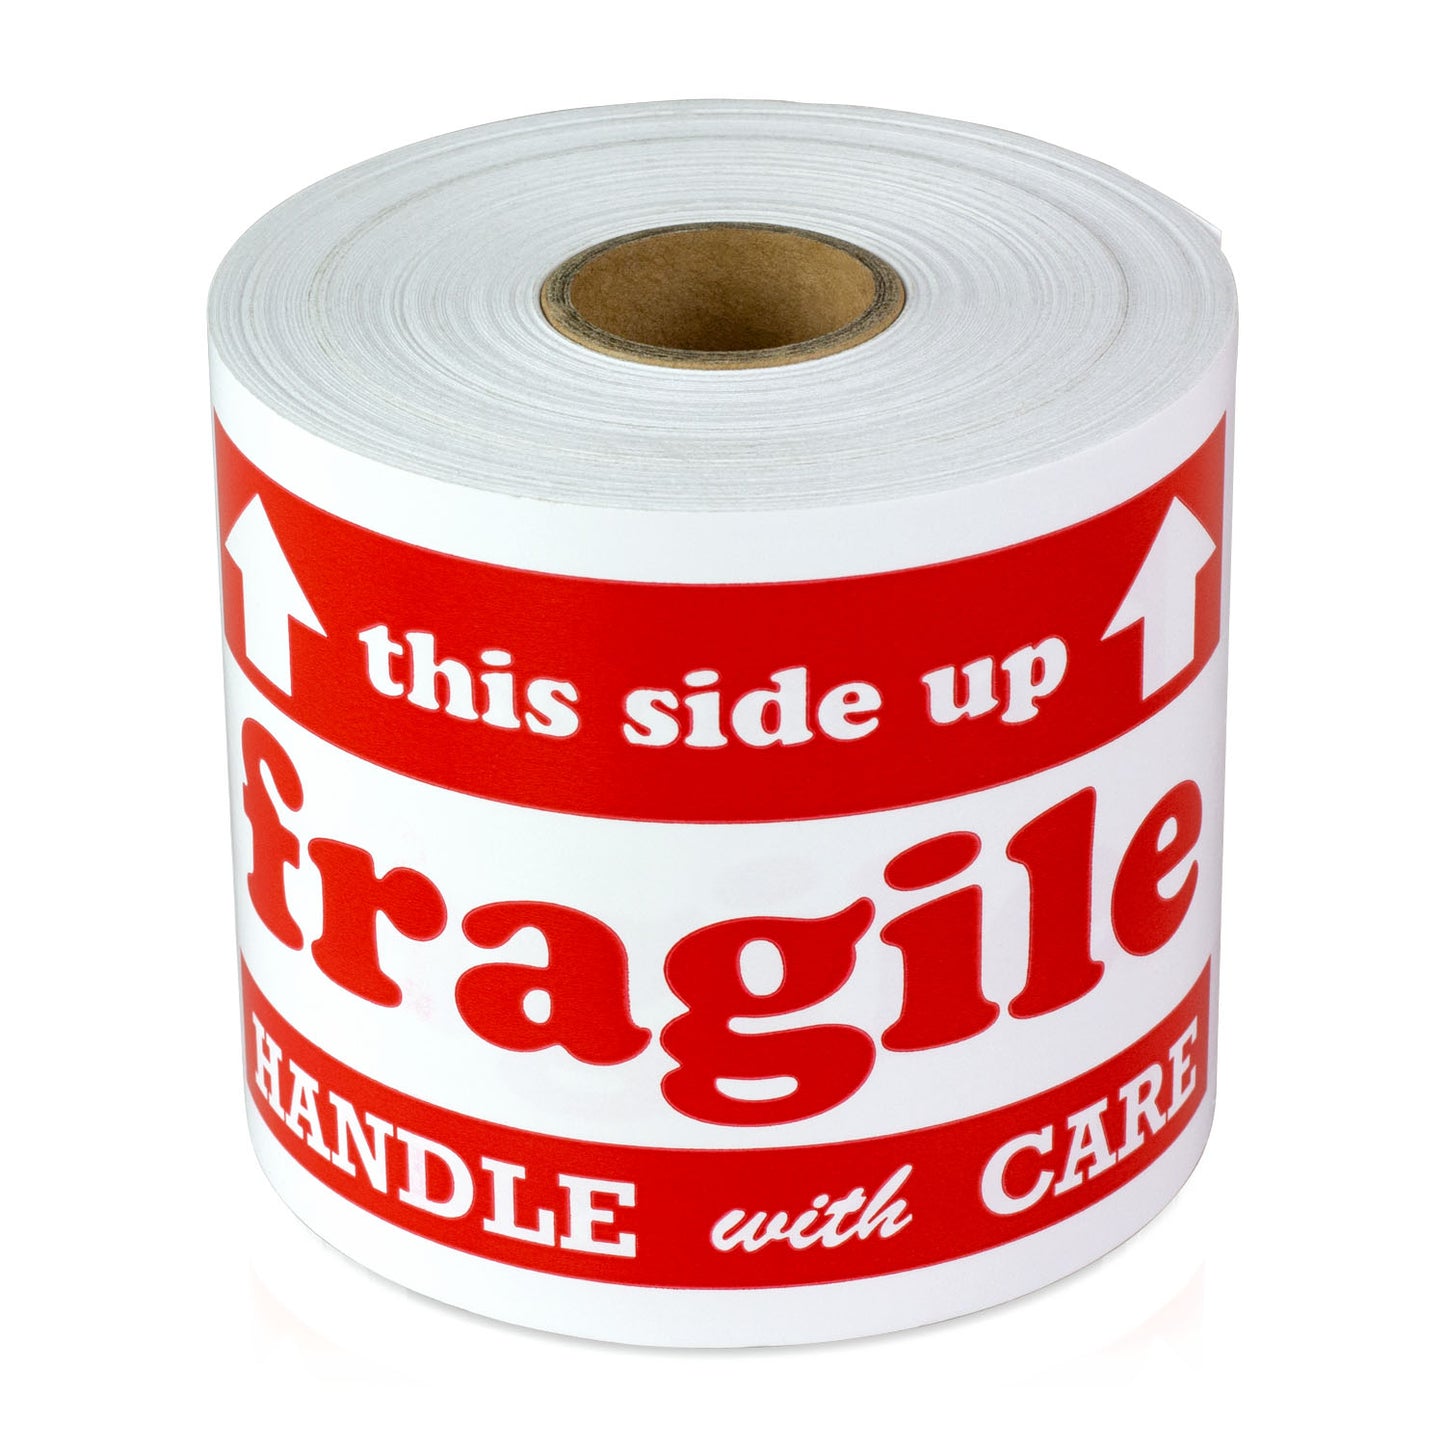 5 x 3 inch | Shipping & Handling: Fragile, Handle With Care Stickers